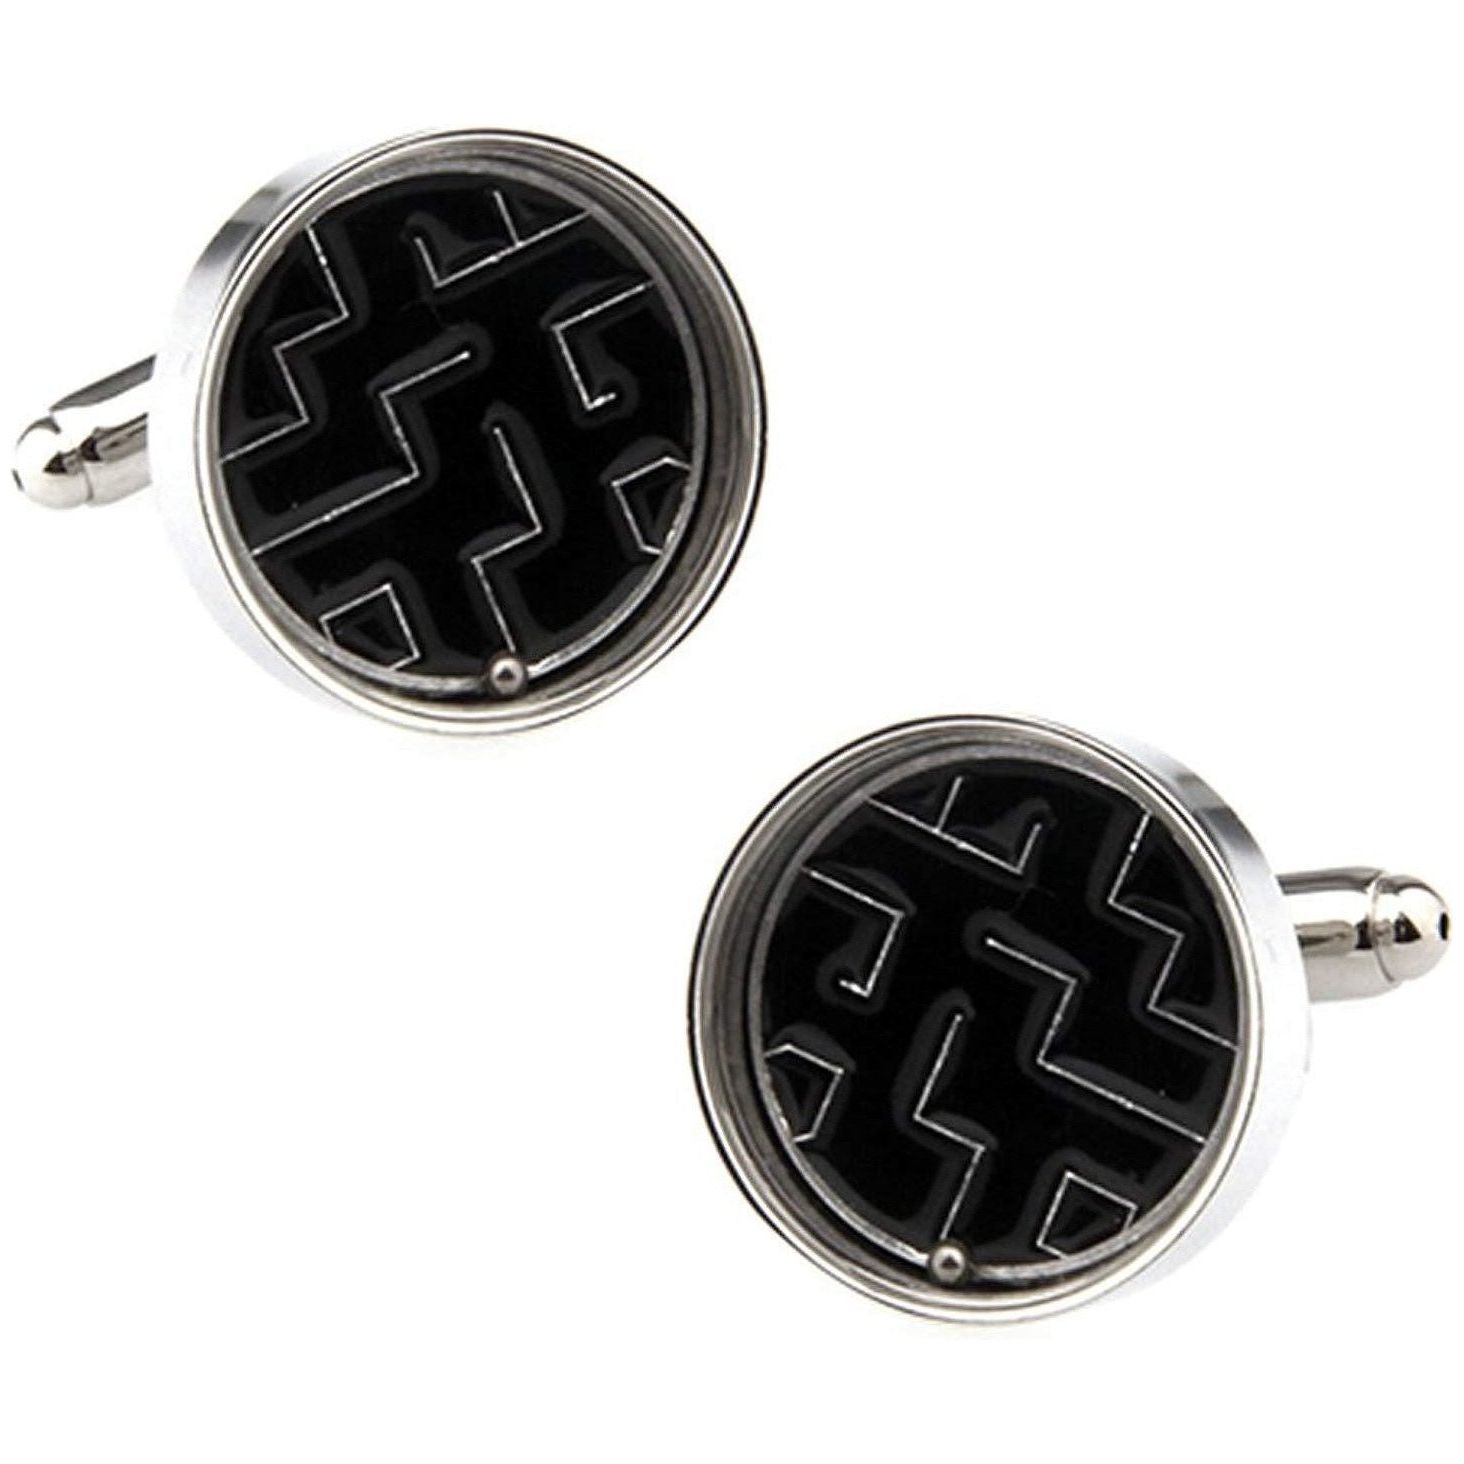 Real Puzzle Cufflinks - Ashton and Finch